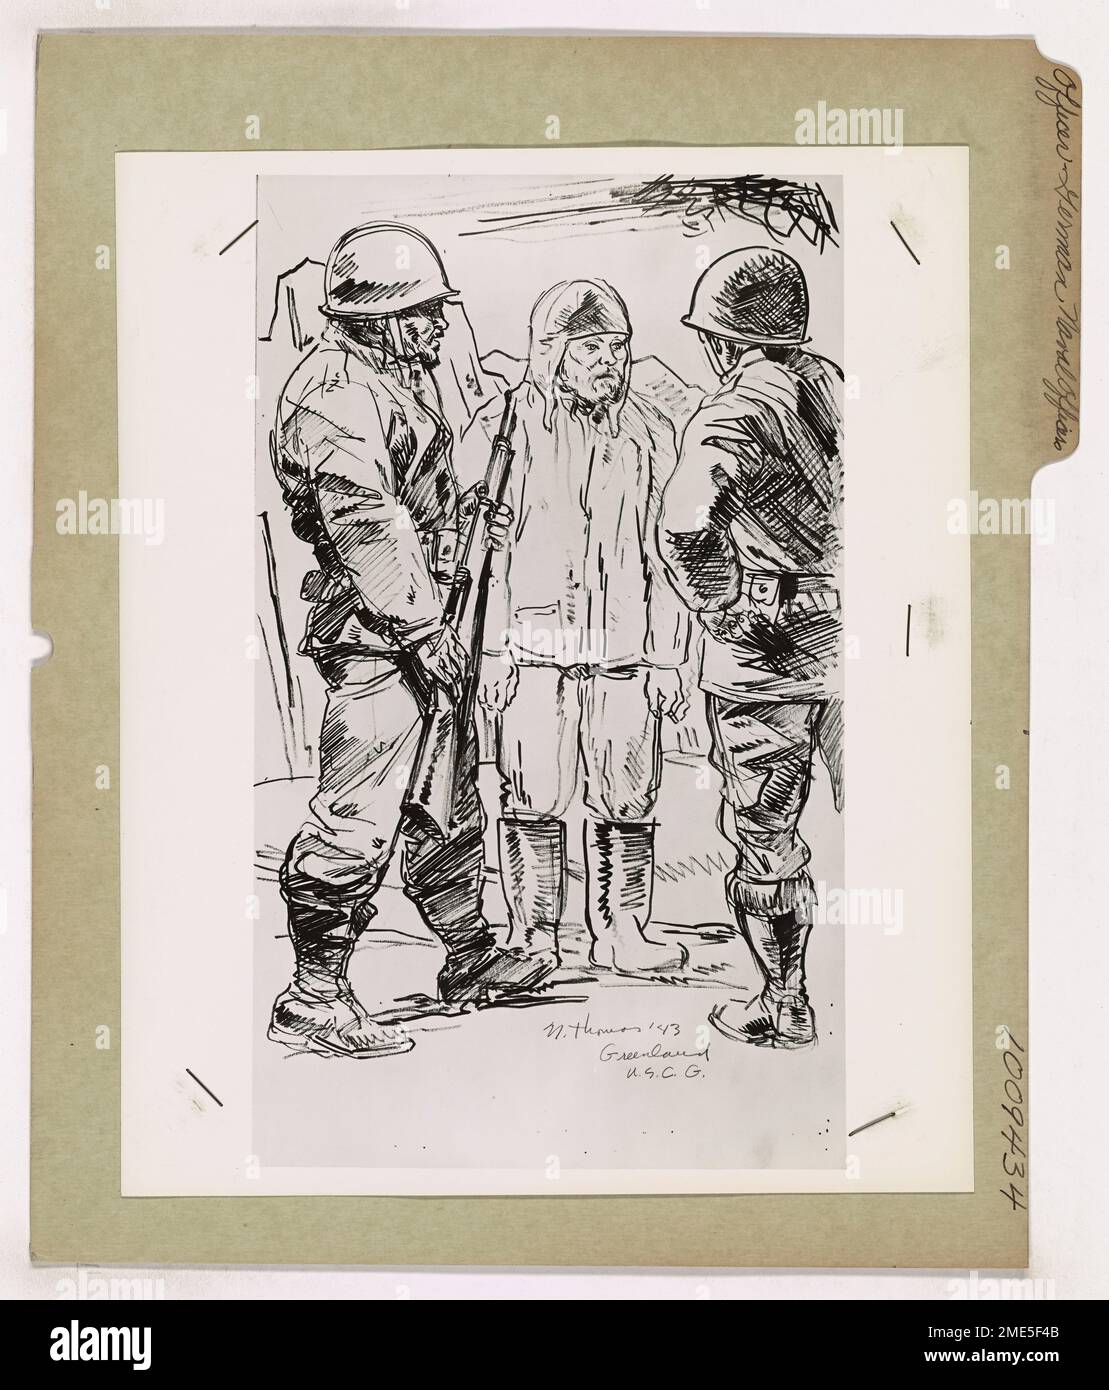 Commandos in Greenland Capture German Officer. This image depicts Army and Coast Guard Commandos as they capture a junior officer of the German Navy in Greenland, drawn by Coast Guard Combat Artist Norman Millet Thomas. Stock Photo